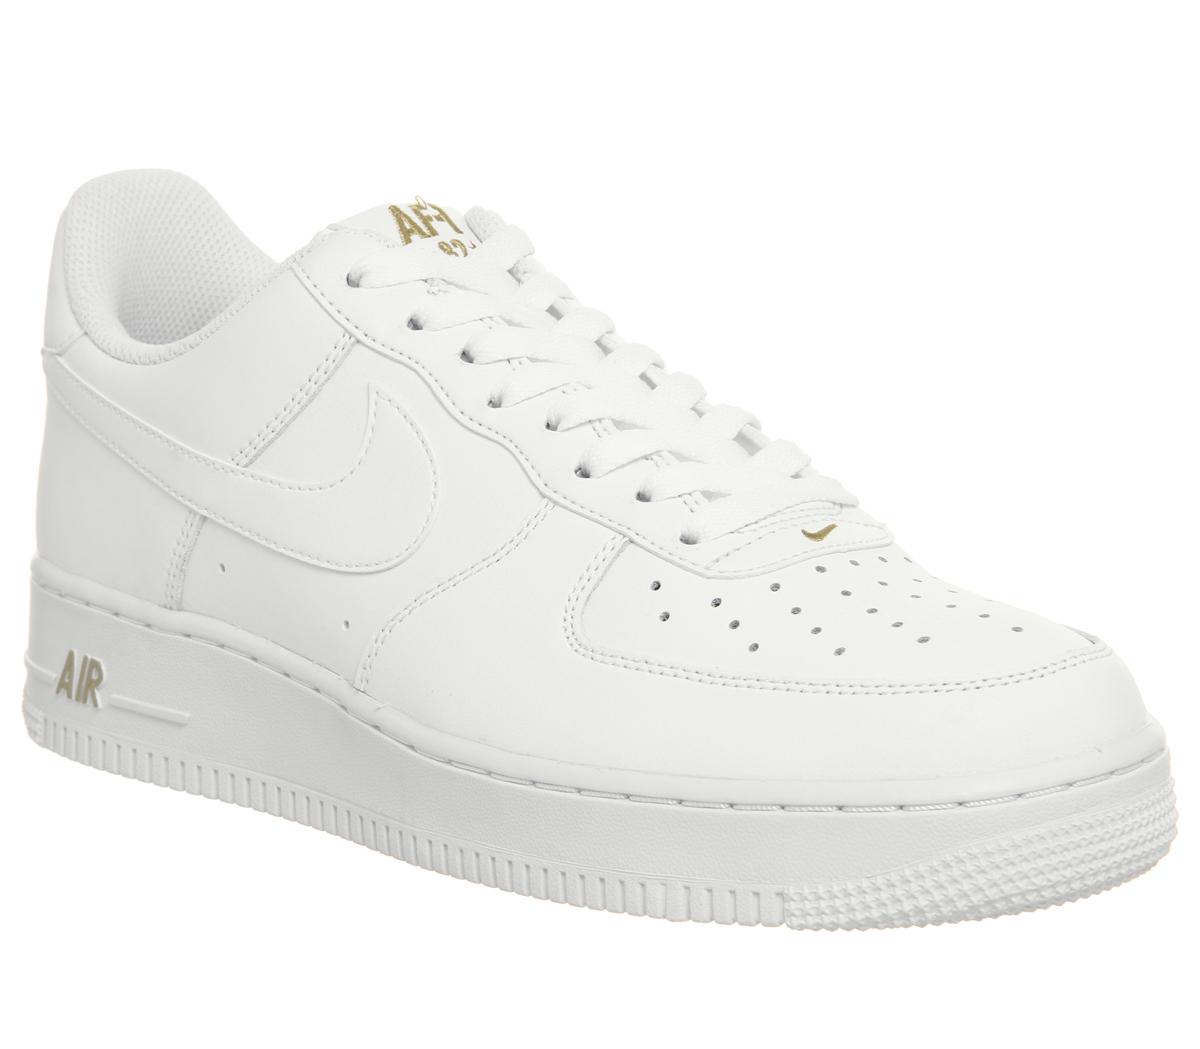 Nike Nike Air Force One M White His Trainers